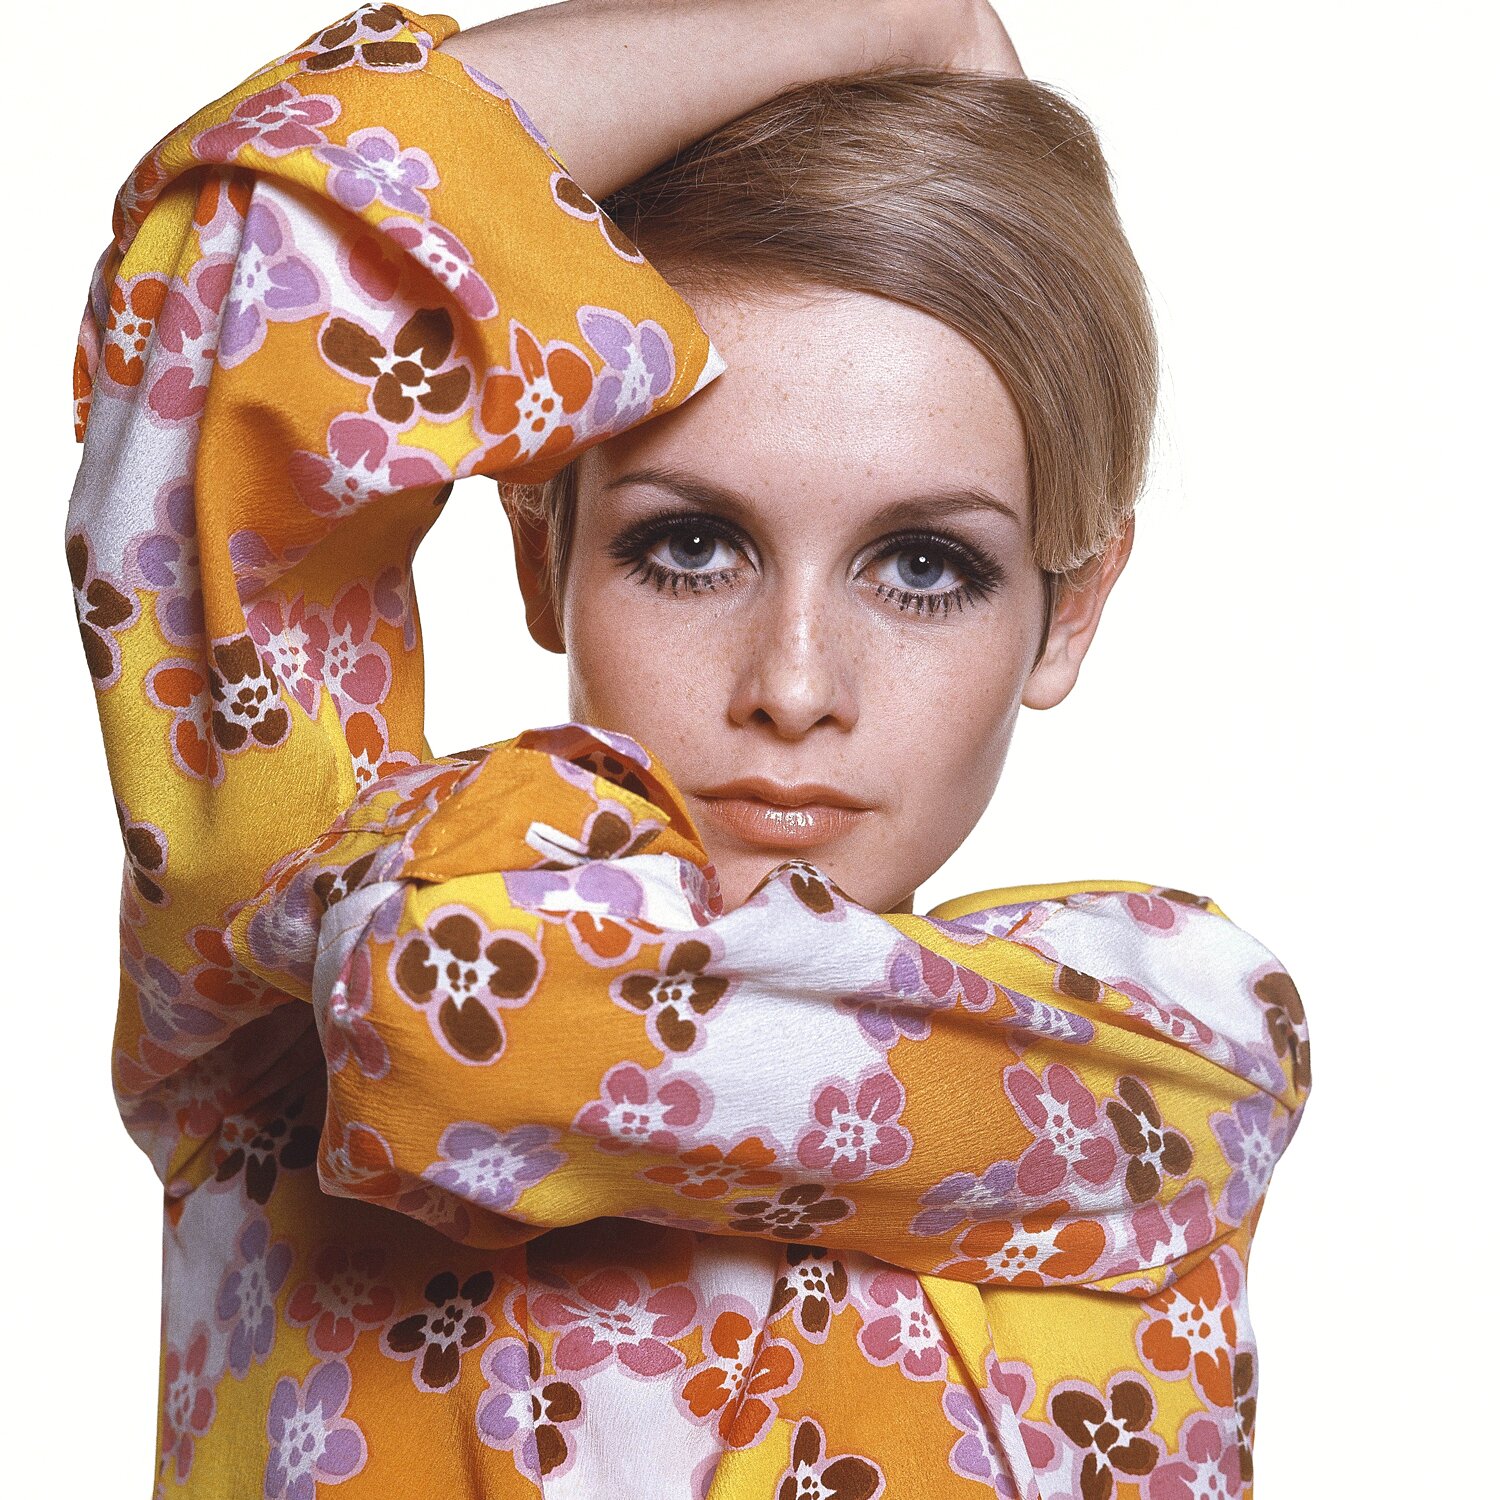 Twiggy Says She Didn't Want Her Iconic 1960s Pixie Haircut